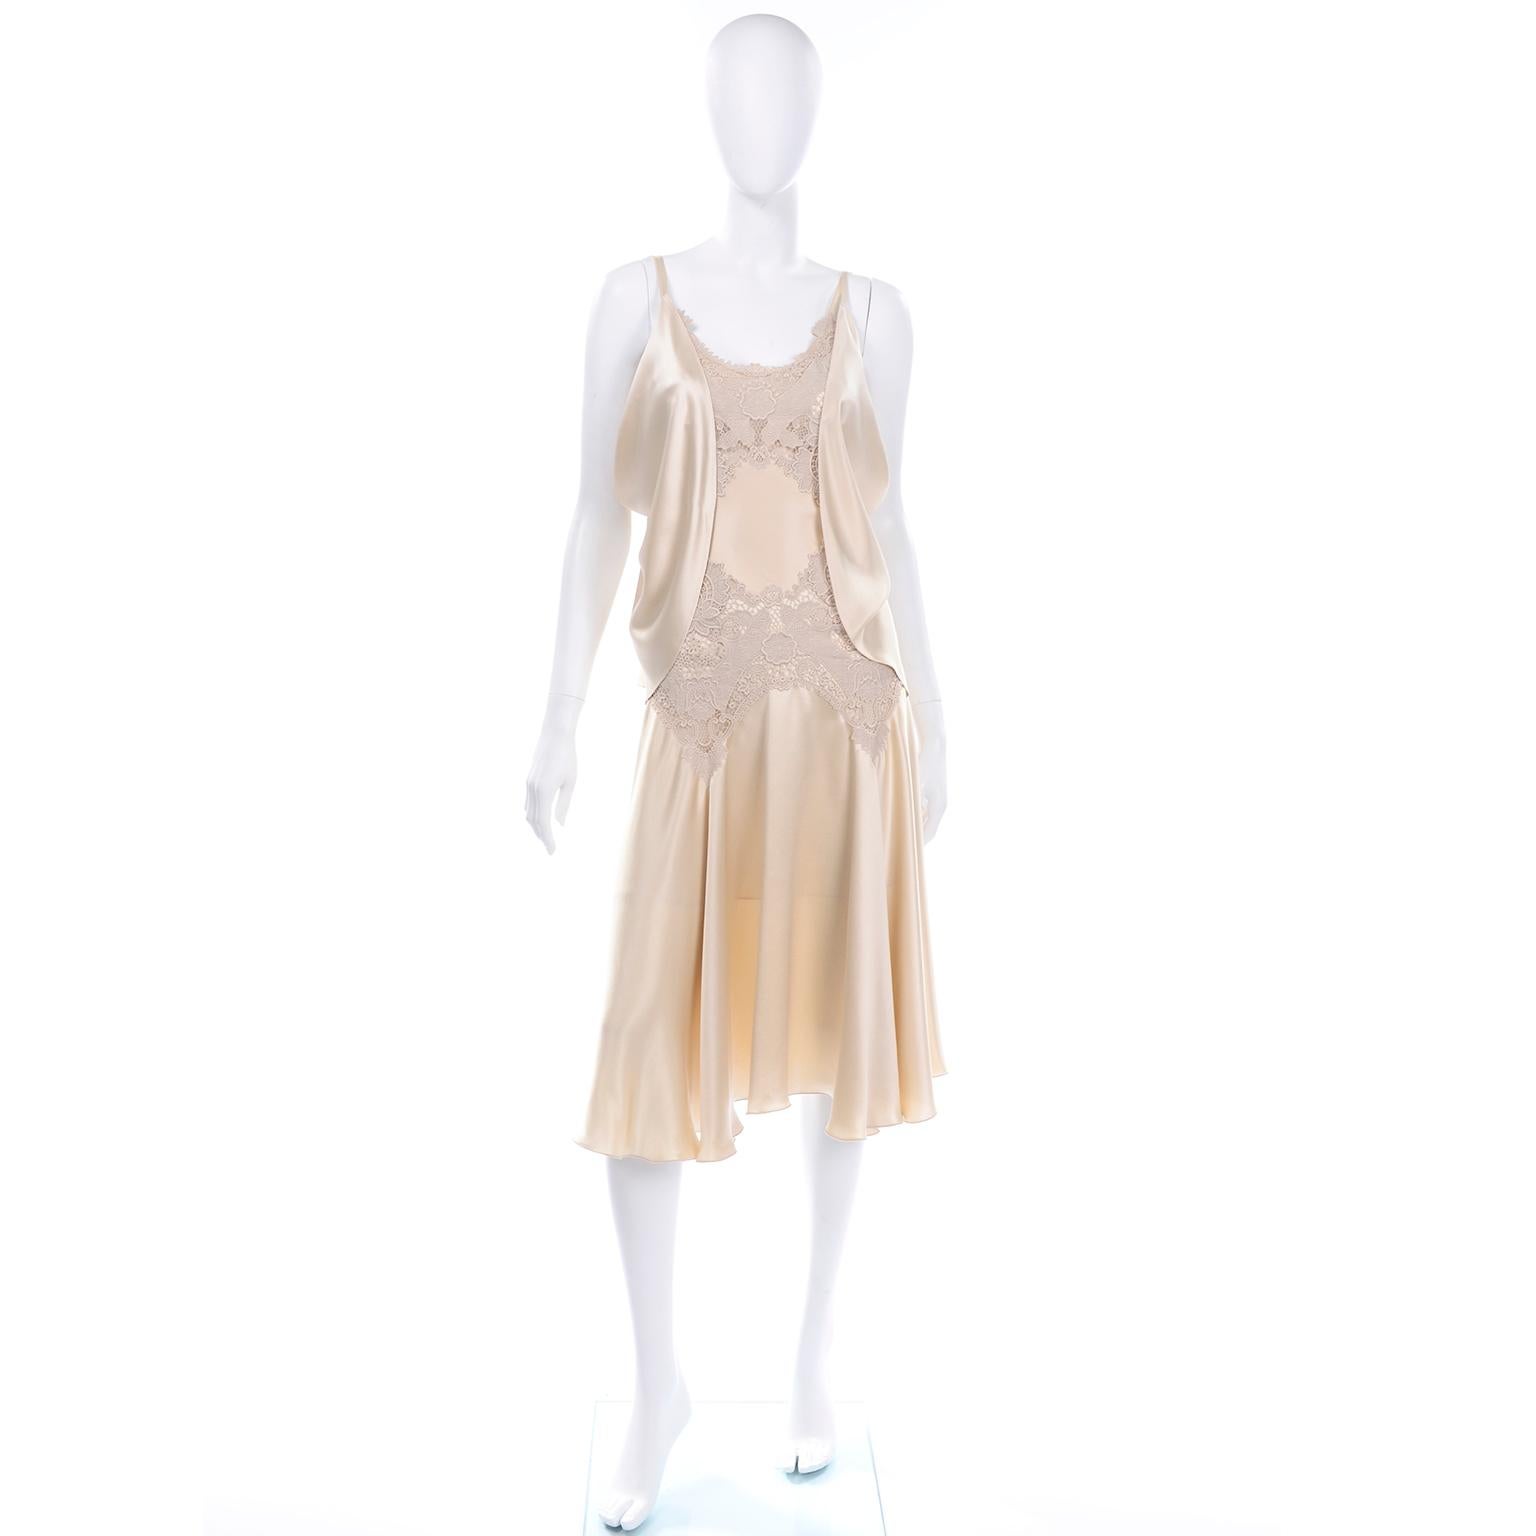 This is a stunning Alexander McQueen champagne silk dress with gorgeous nude lace trim on the bust and waist. This incredible dress has sheer panels on the bust and at the waist line. The waist has a panel of silk in between the lace, which